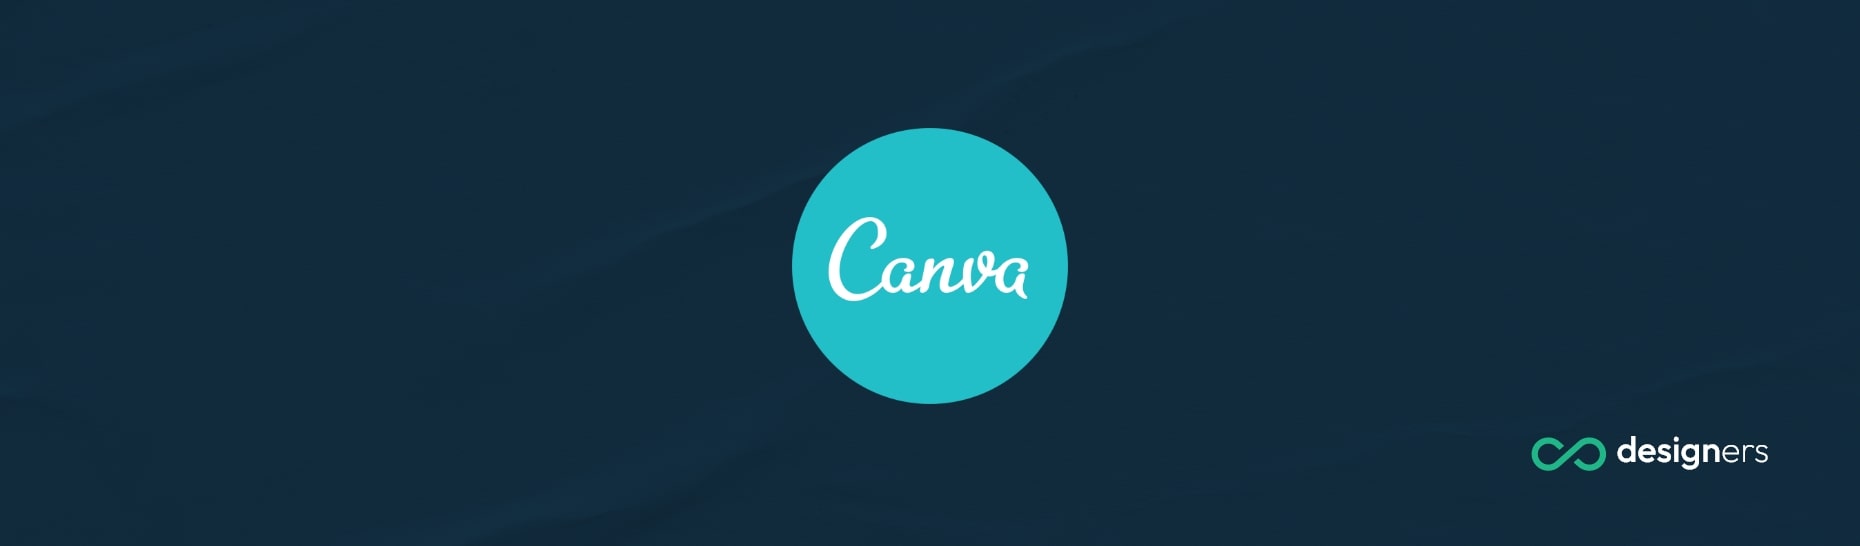 Can I Use Canva Pro Images for Clients?